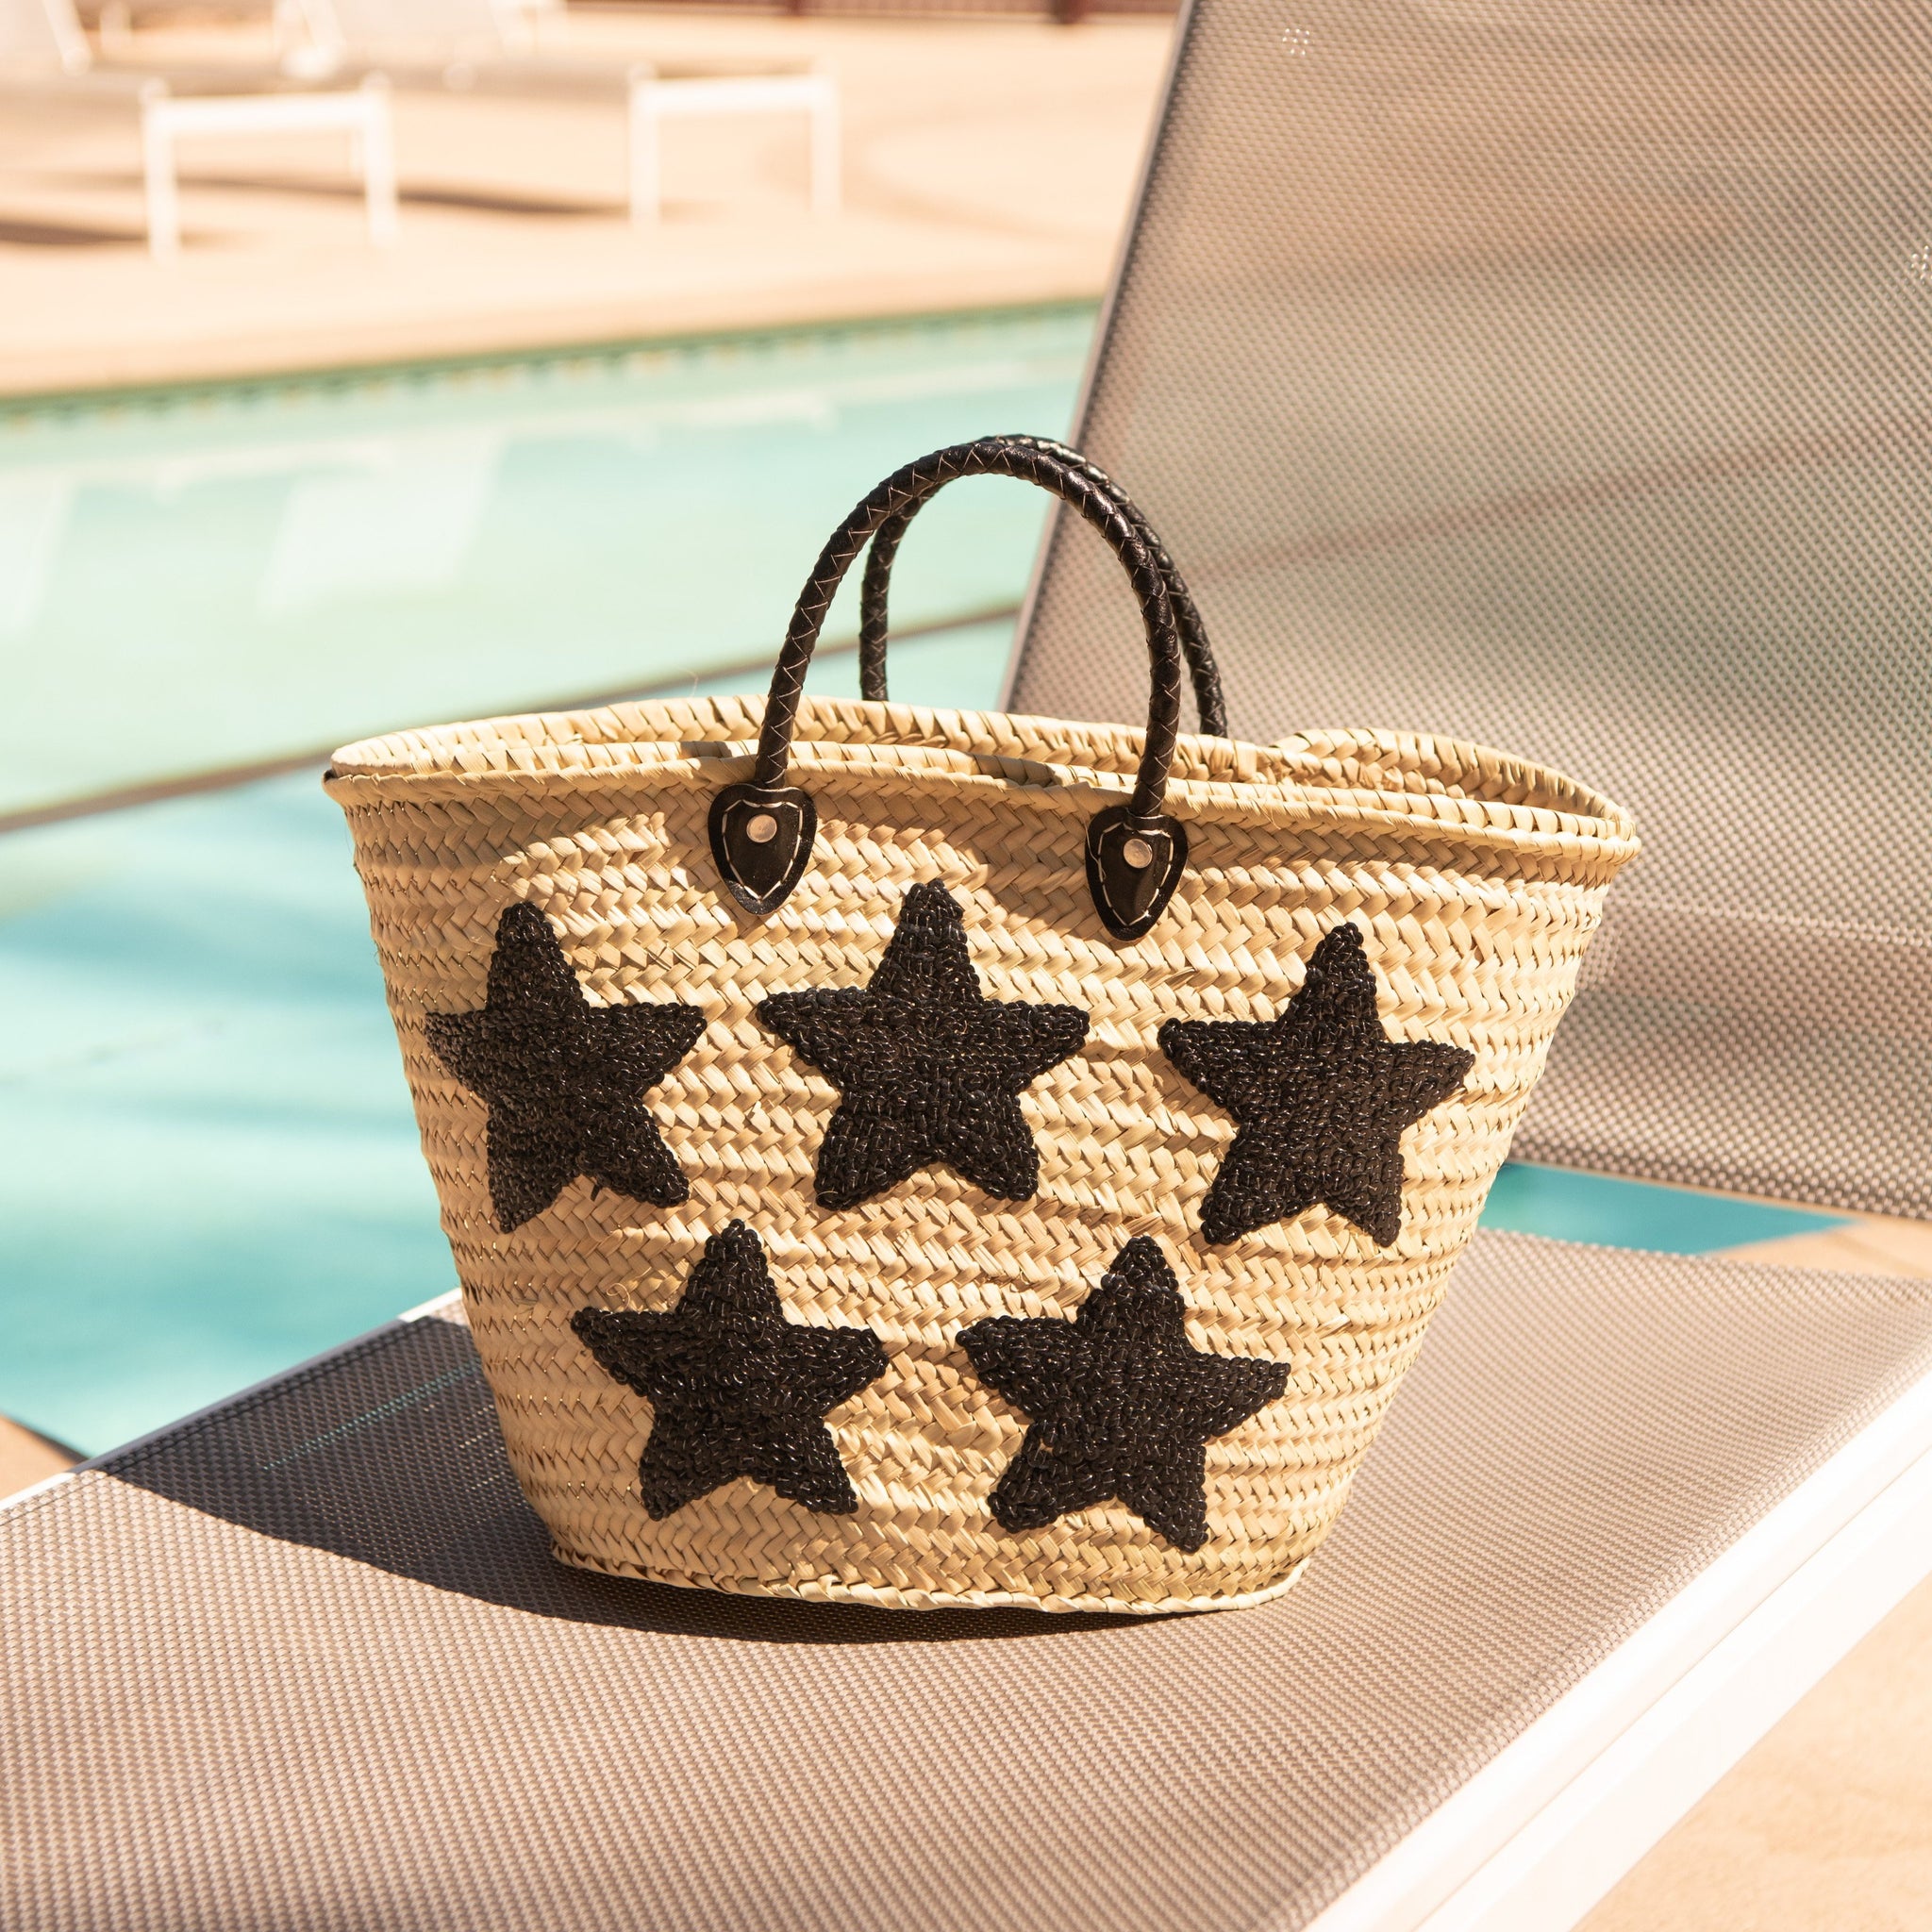 Large Straw Bag with Black Sequin Stars by the pool